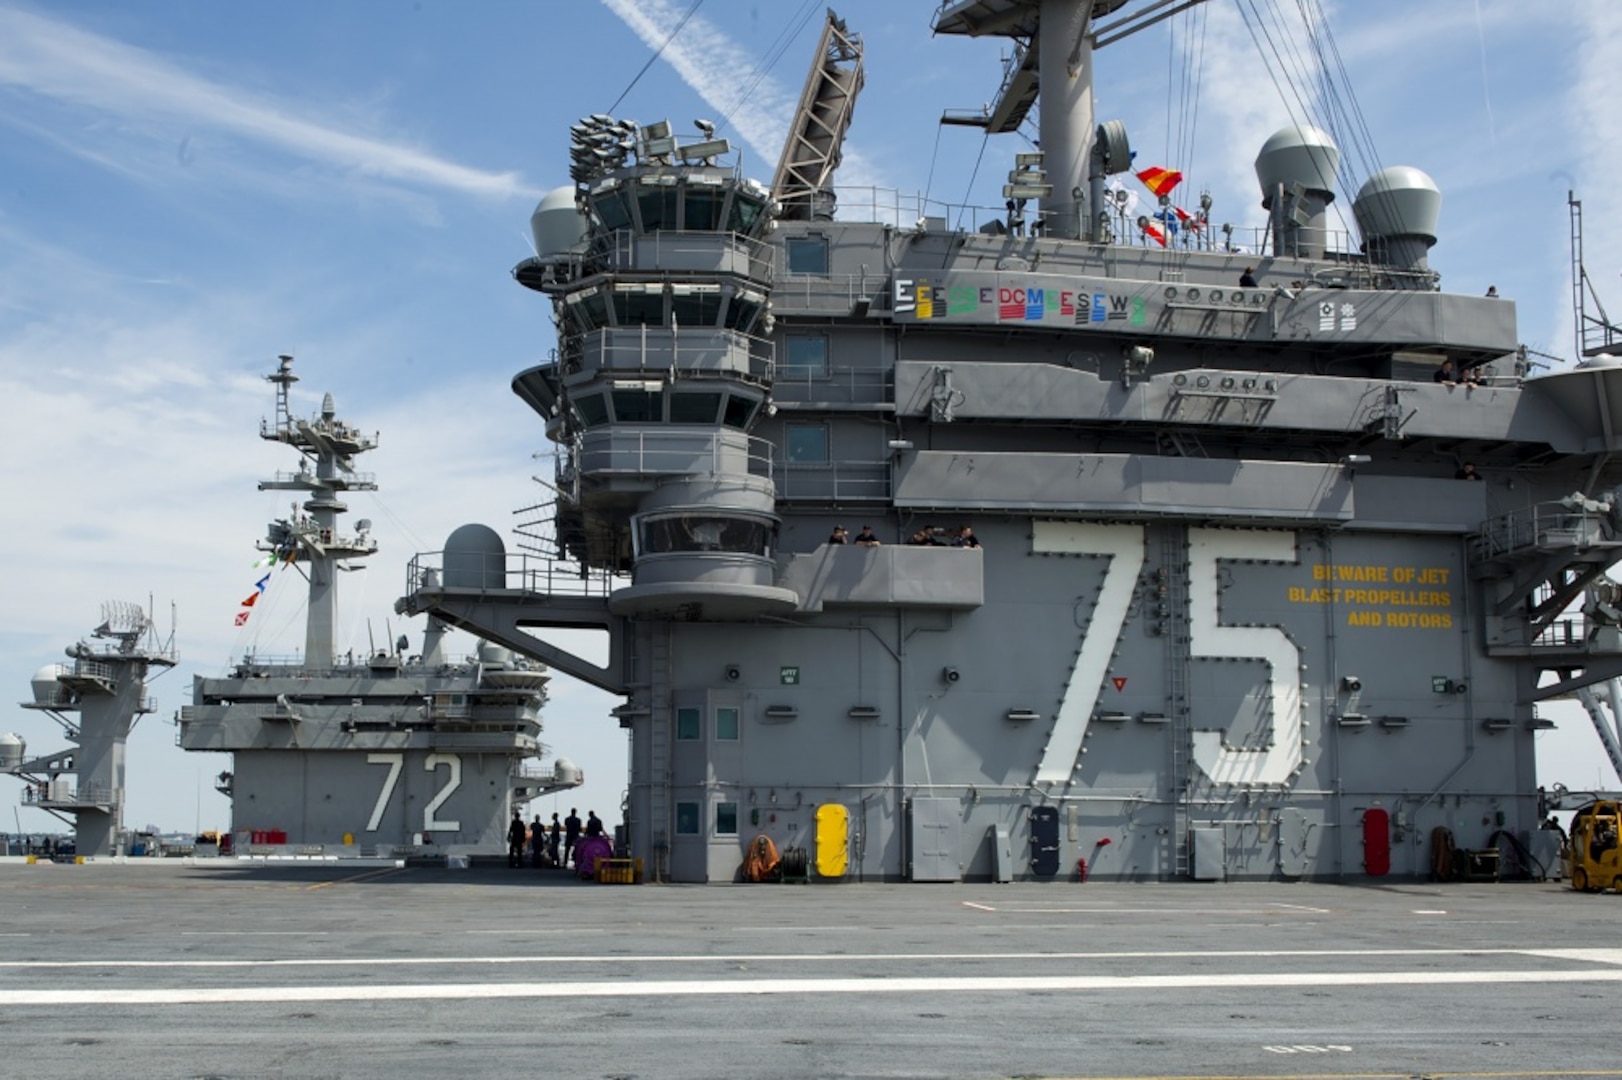 NORFOLK (July 25, 2017) The superstructures of the aircraft carriers USS Harry S Truman (CVN 75), right, and USS Abraham Lincoln (CVN 72) are close together during Harry S Truman's transit into port. Harry S Truman returned to Naval Station Norfolk following the successful completion of a four-day sea trials evolution.